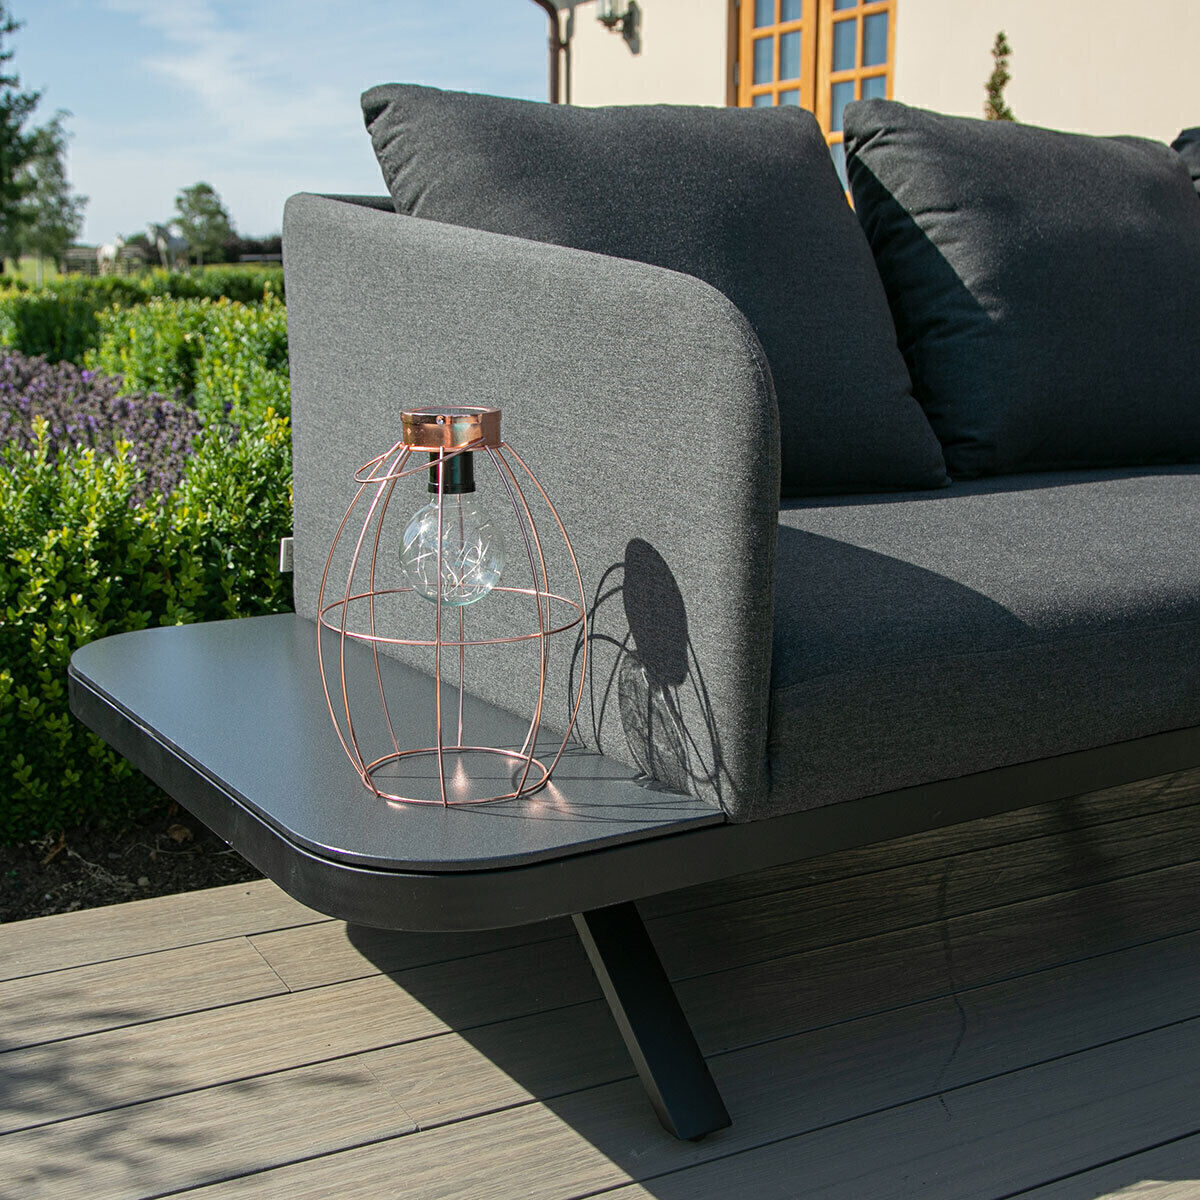 Maze - Outdoor Fabric Cove Corner Sofa Group - Charcoal product image